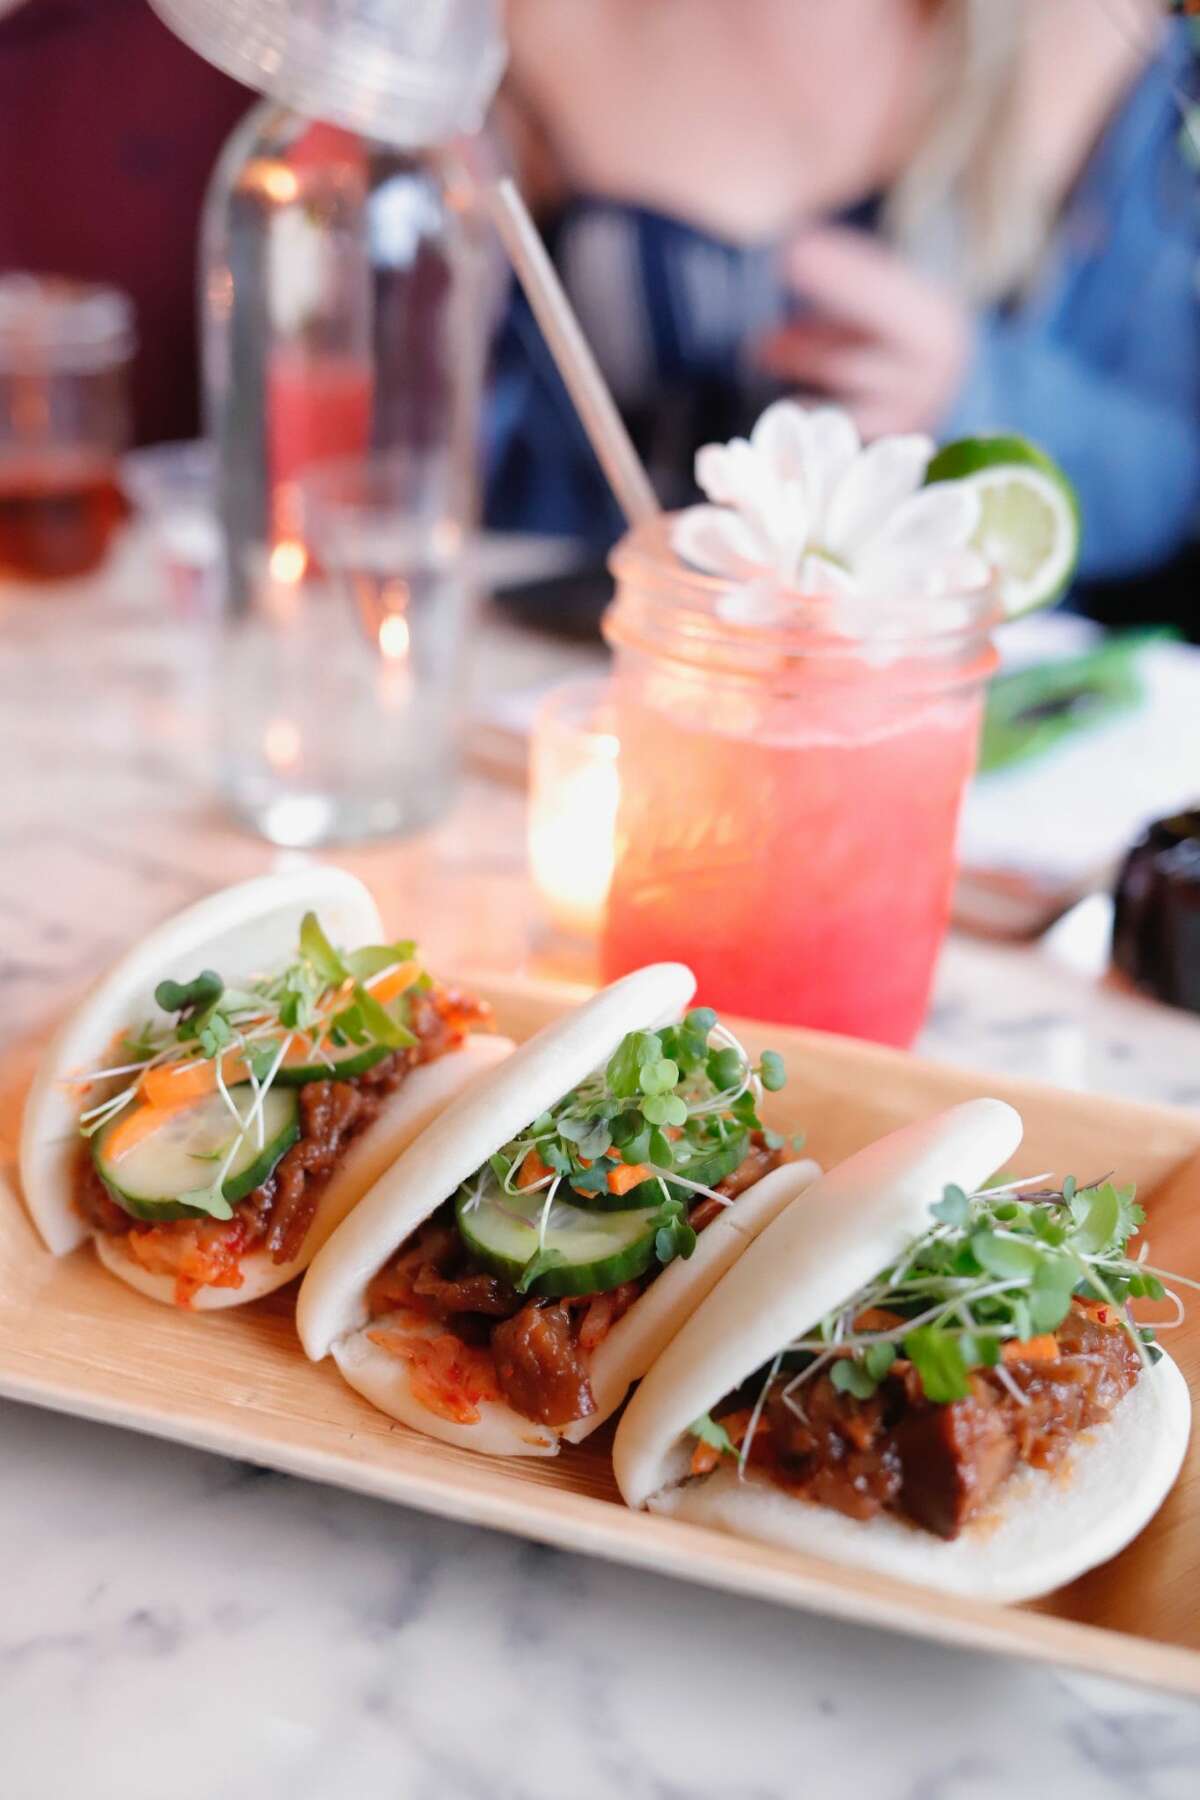 Bao buns with barbecued jackfruit at Troy Beer Garden in Troy. (Konrad Odhiambo/for the Times Union.)